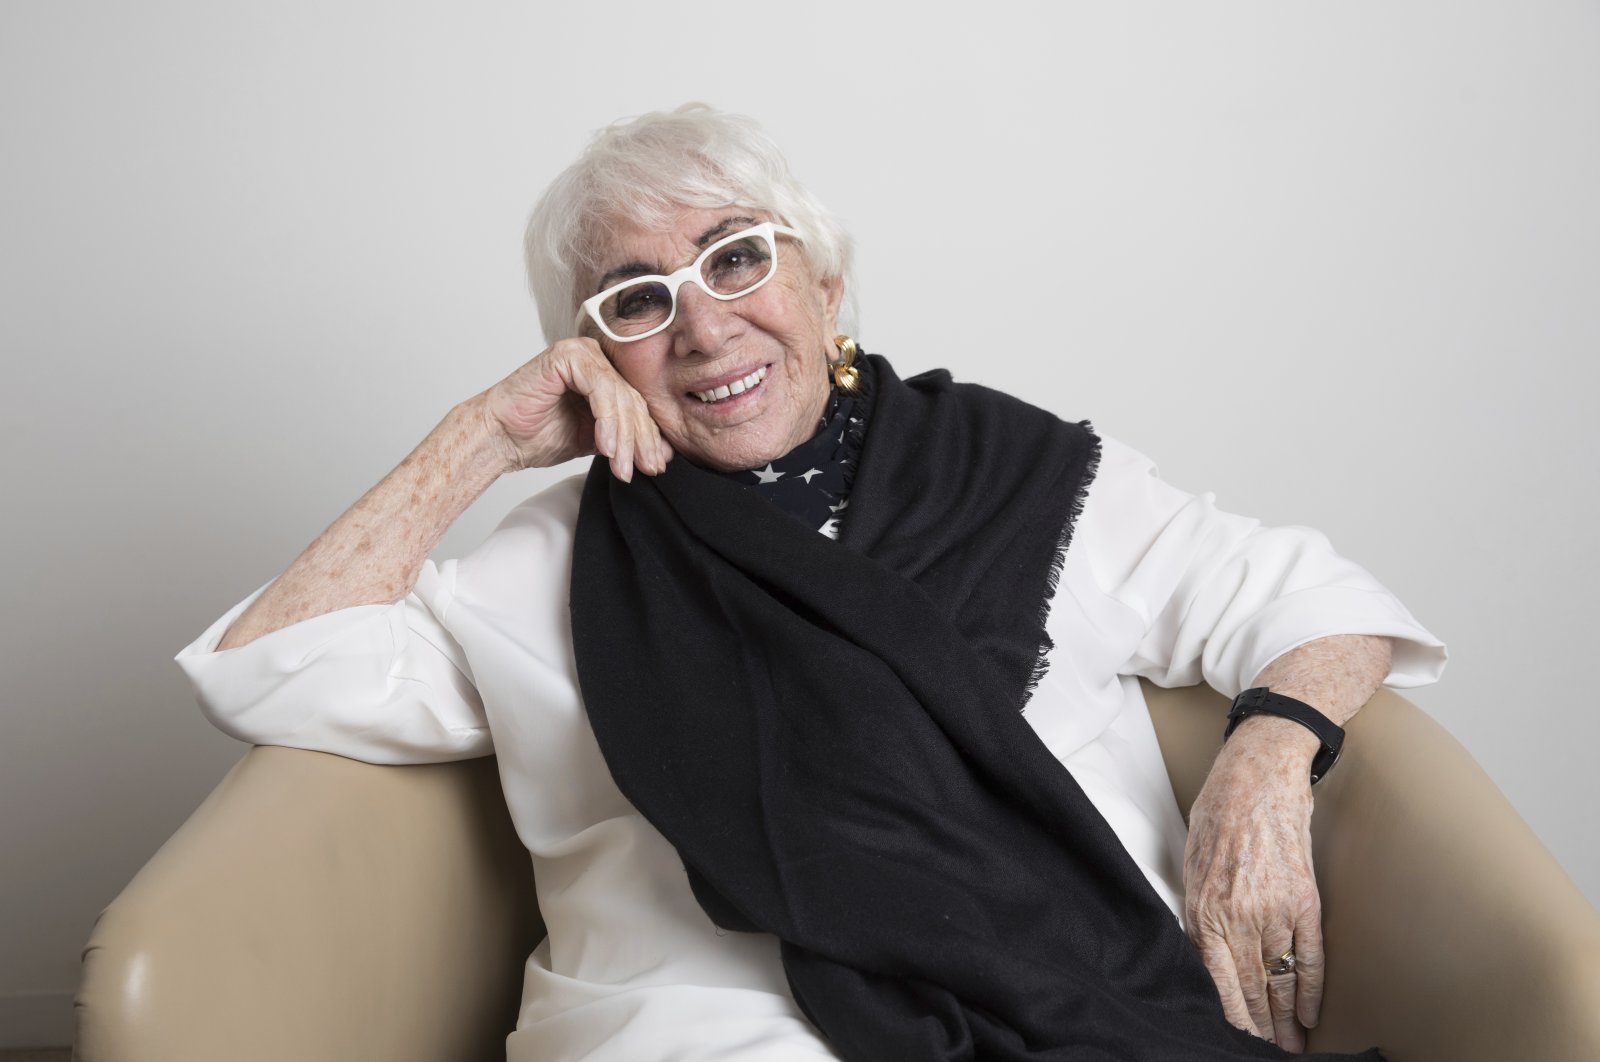 Lina Wertmuller poses for a portrait on Oct. 24, 2019 in Los Angeles. (AP)